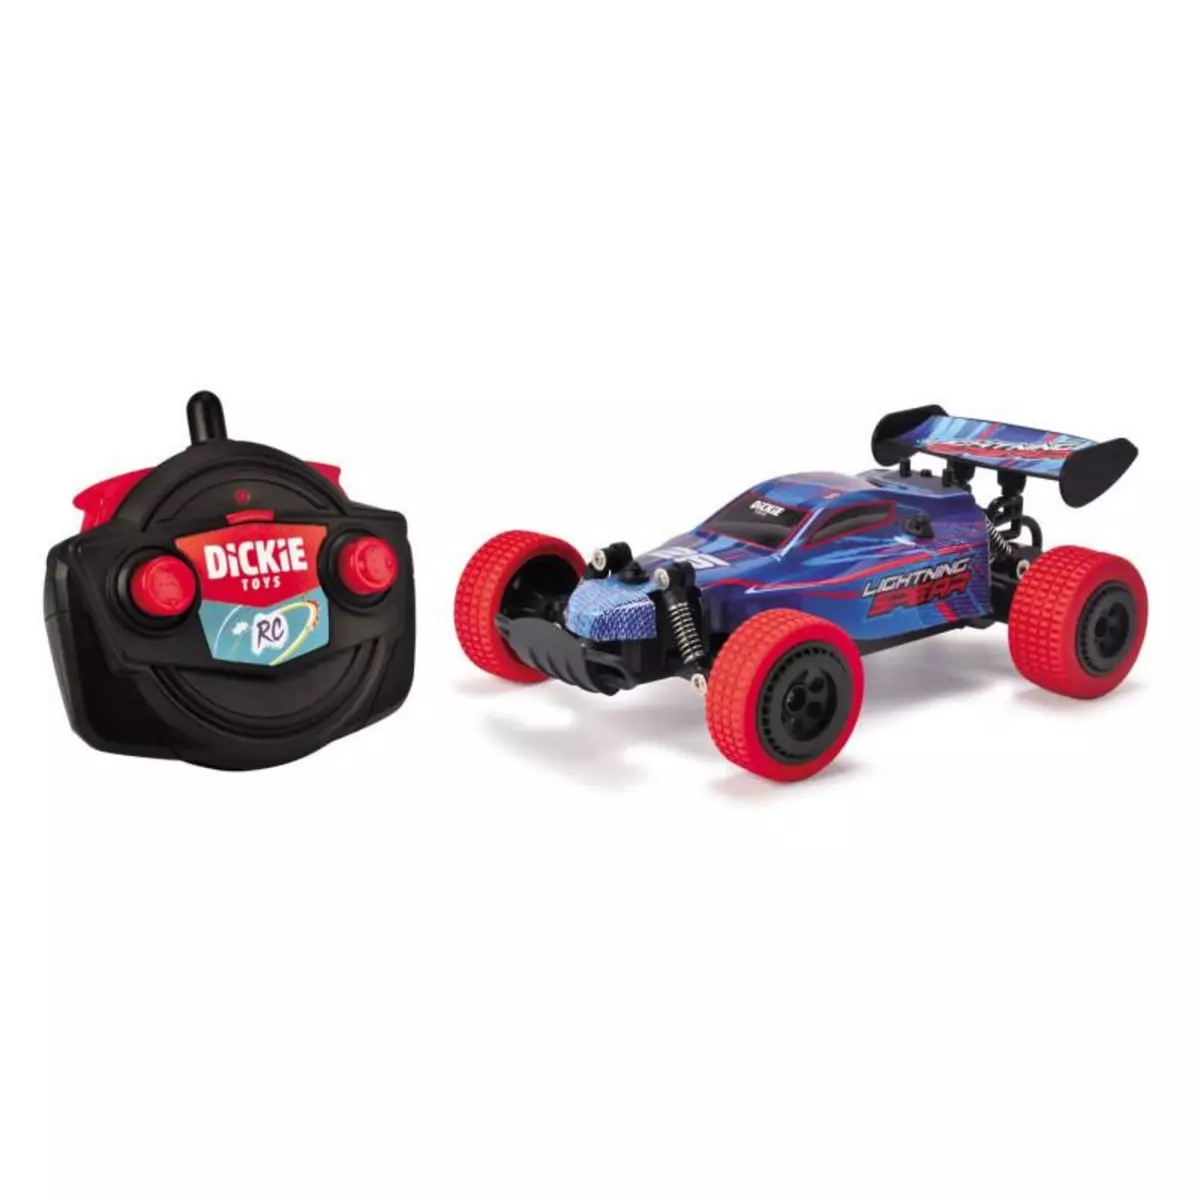 Dickie Dickie RC Lightning Spear Controllable Car 201105003